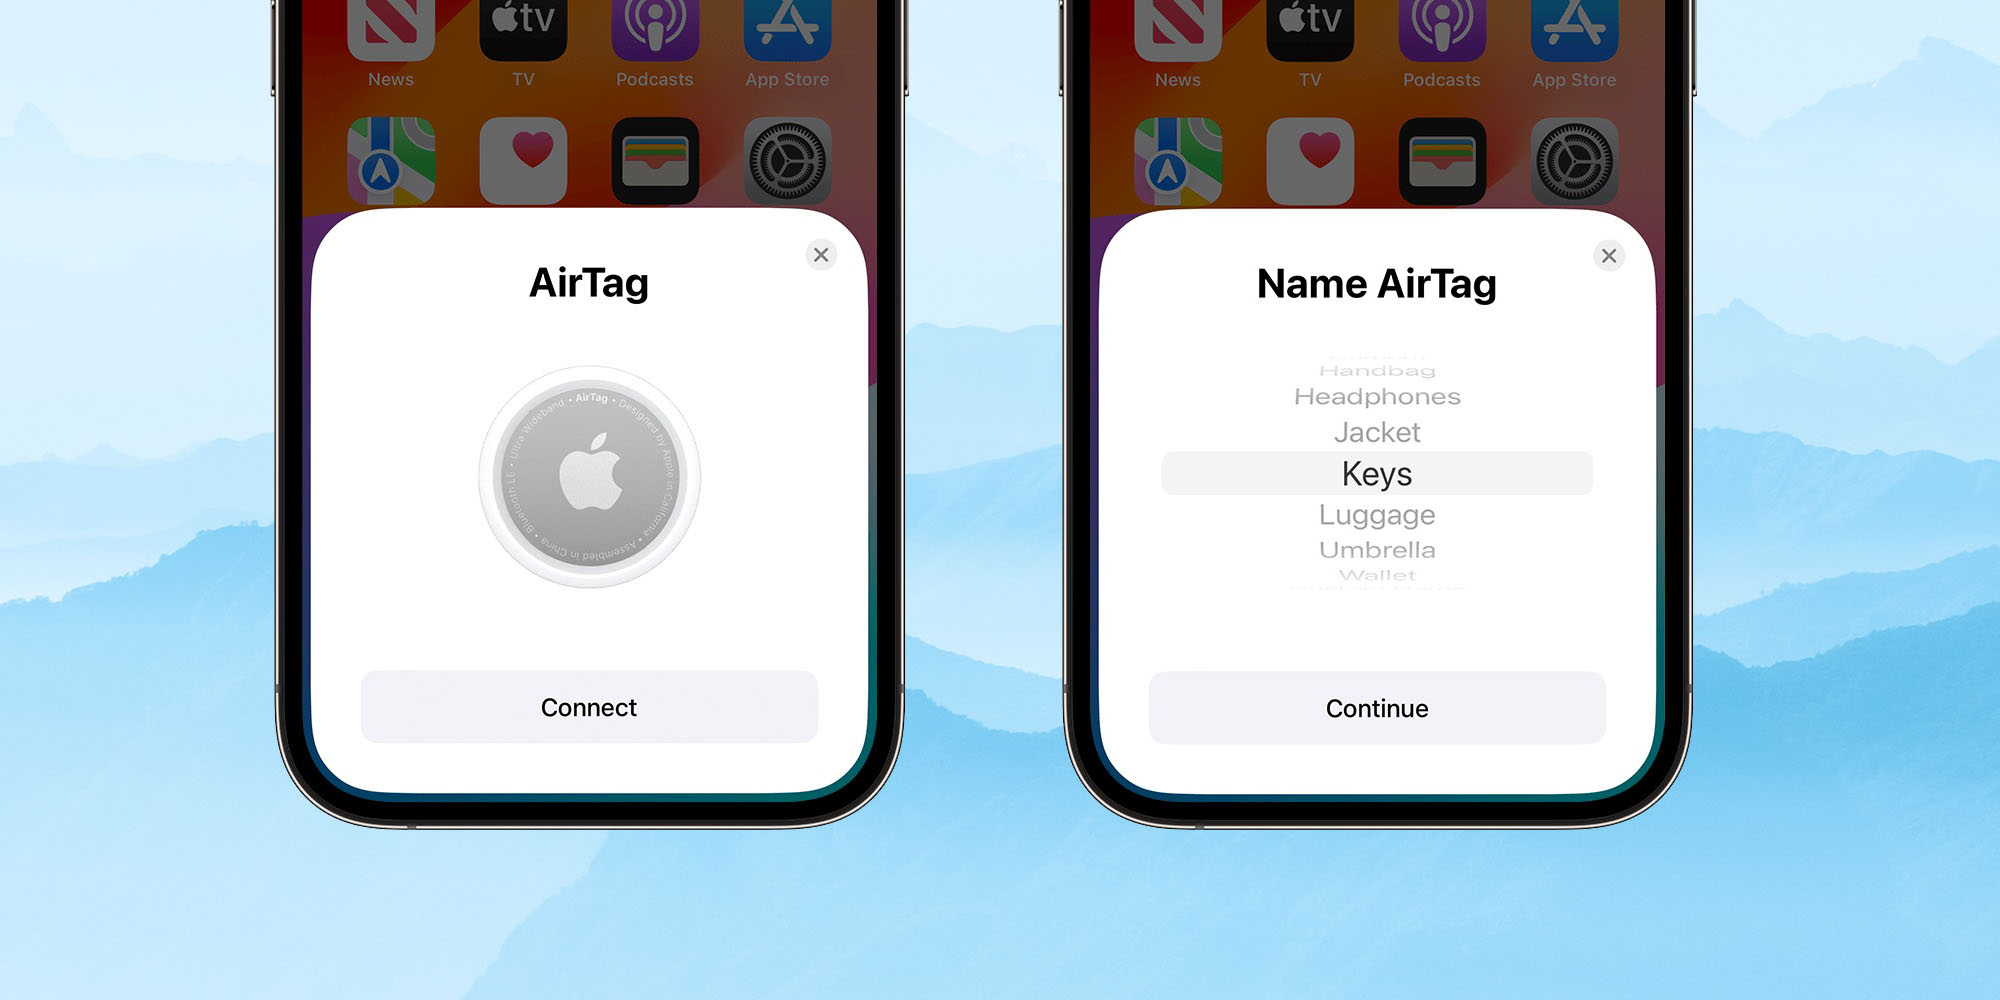 Video: User rebuilds AirTag as a thinner card that fits into wallets -  9to5Mac